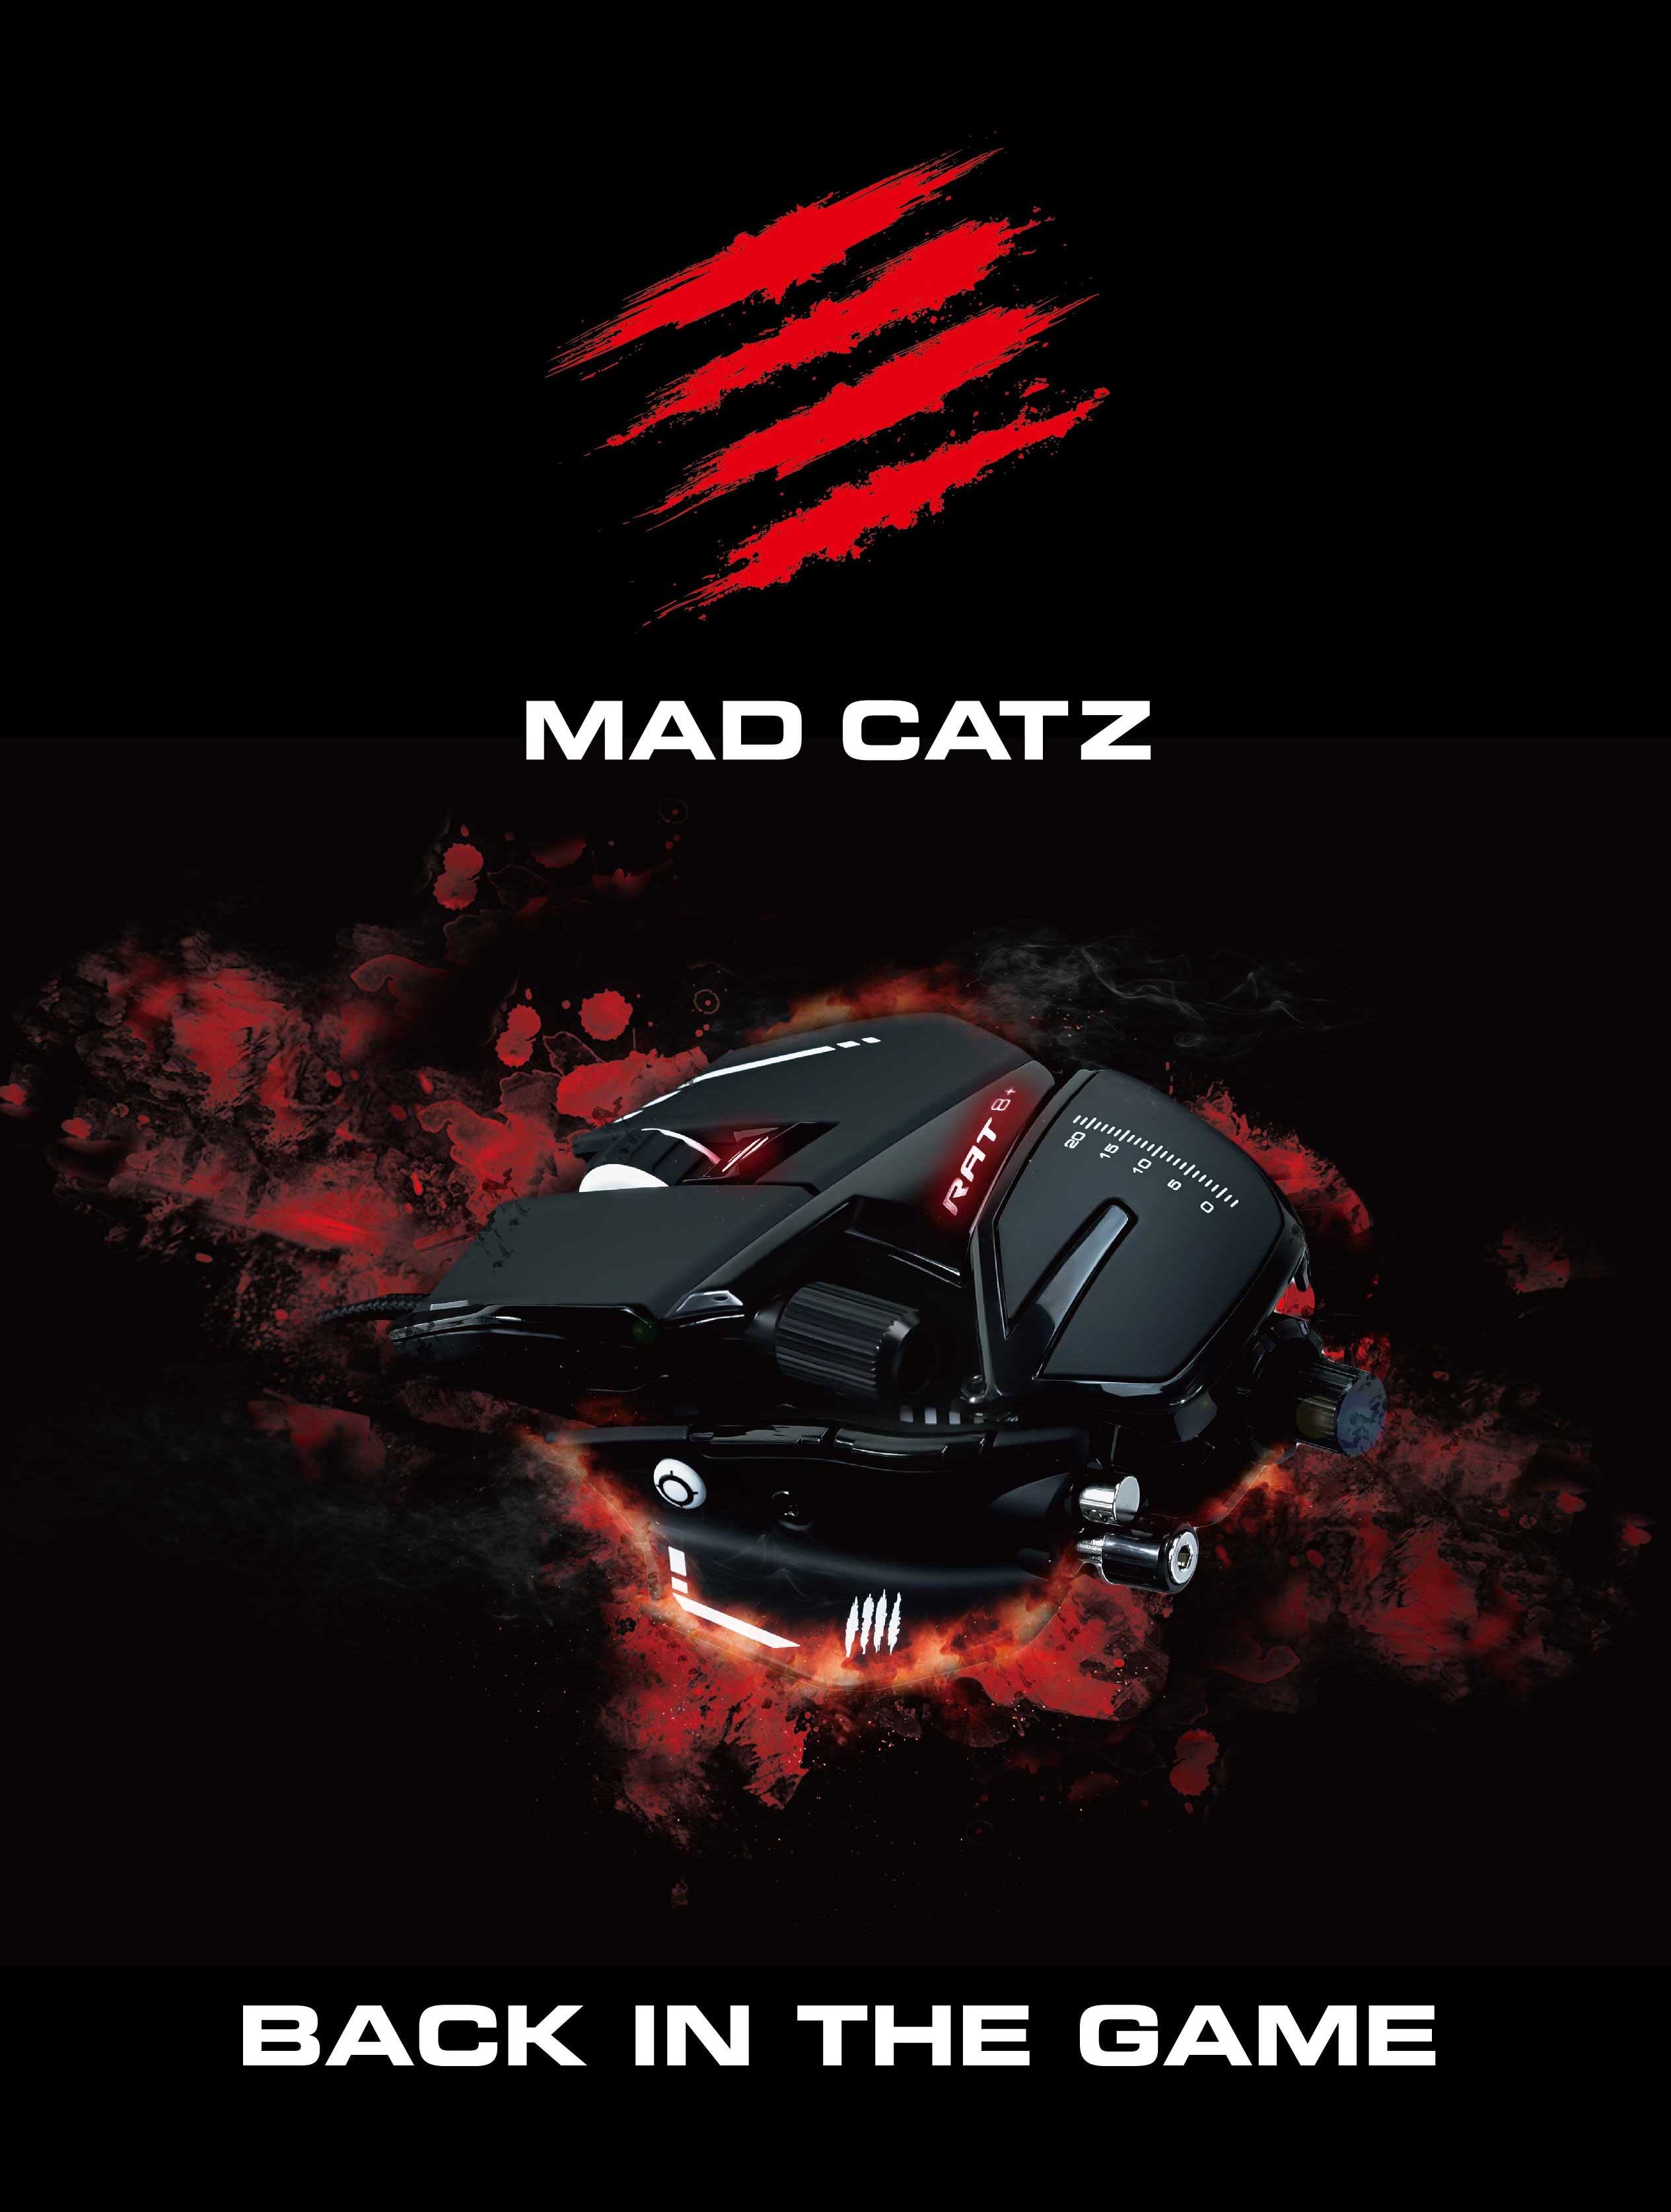 Mad Catz back in the game